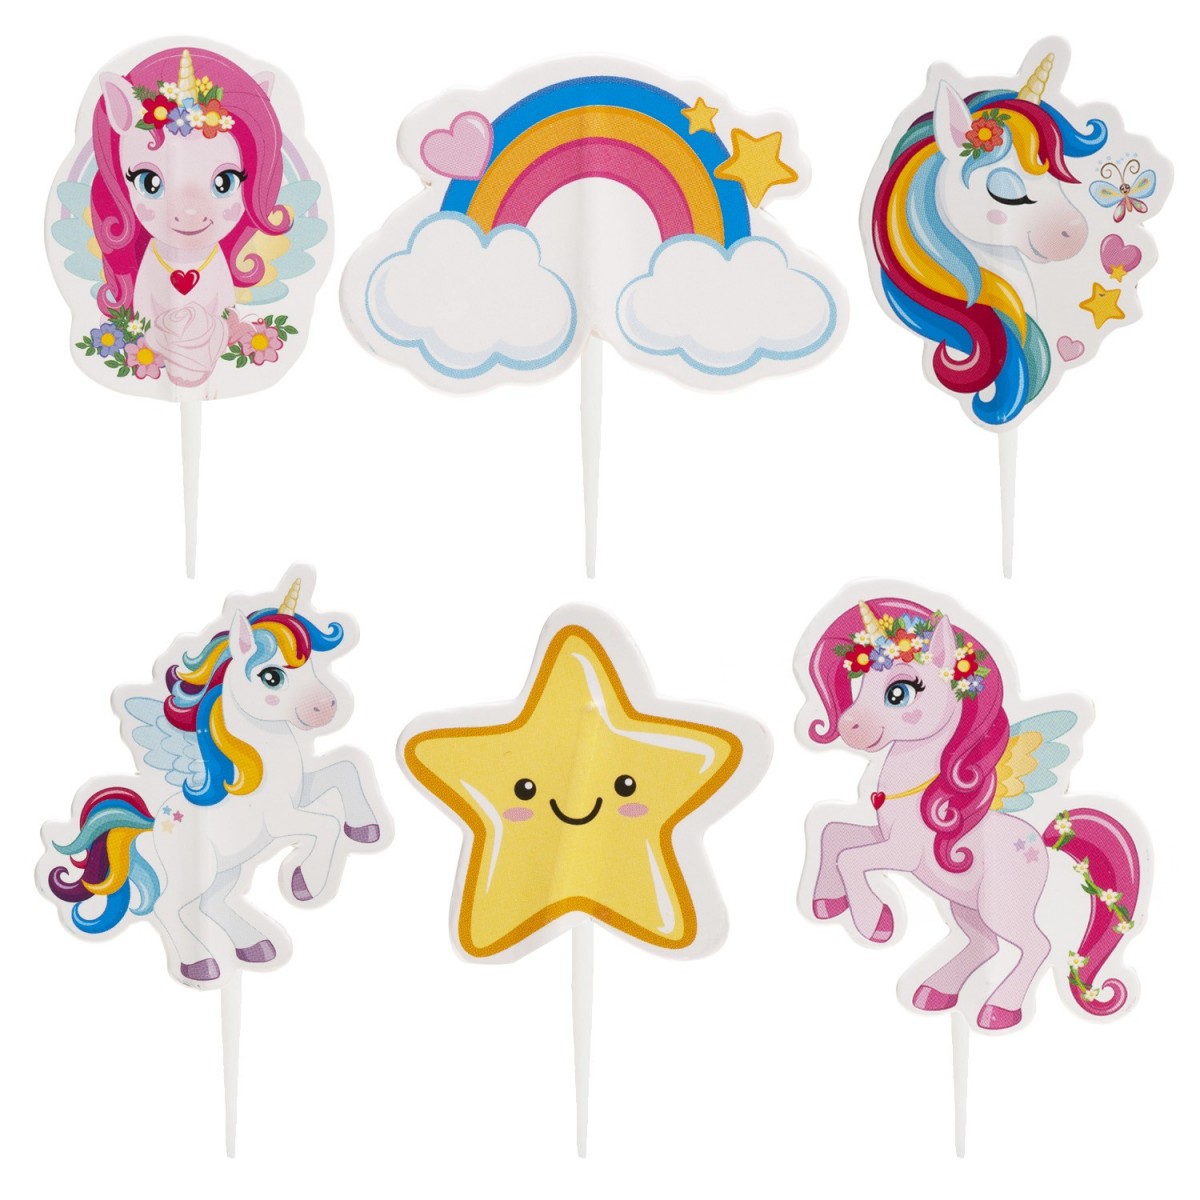 CAKE TOPPERS LICORNE 6ASS 30PCS 